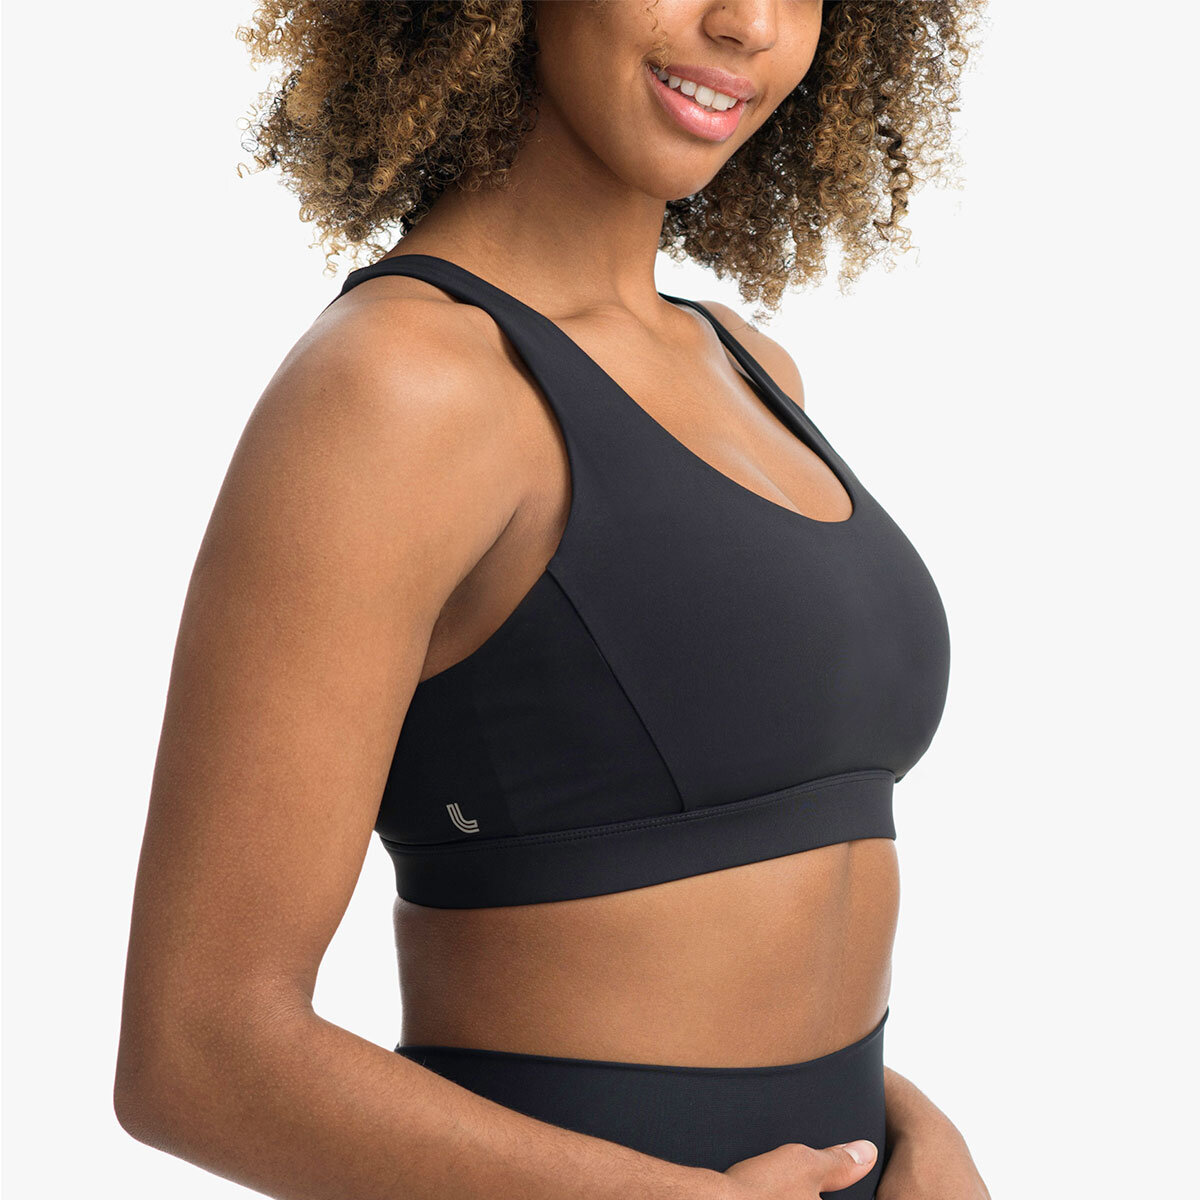 Lolë sports bra, 2-pack offer at Costco